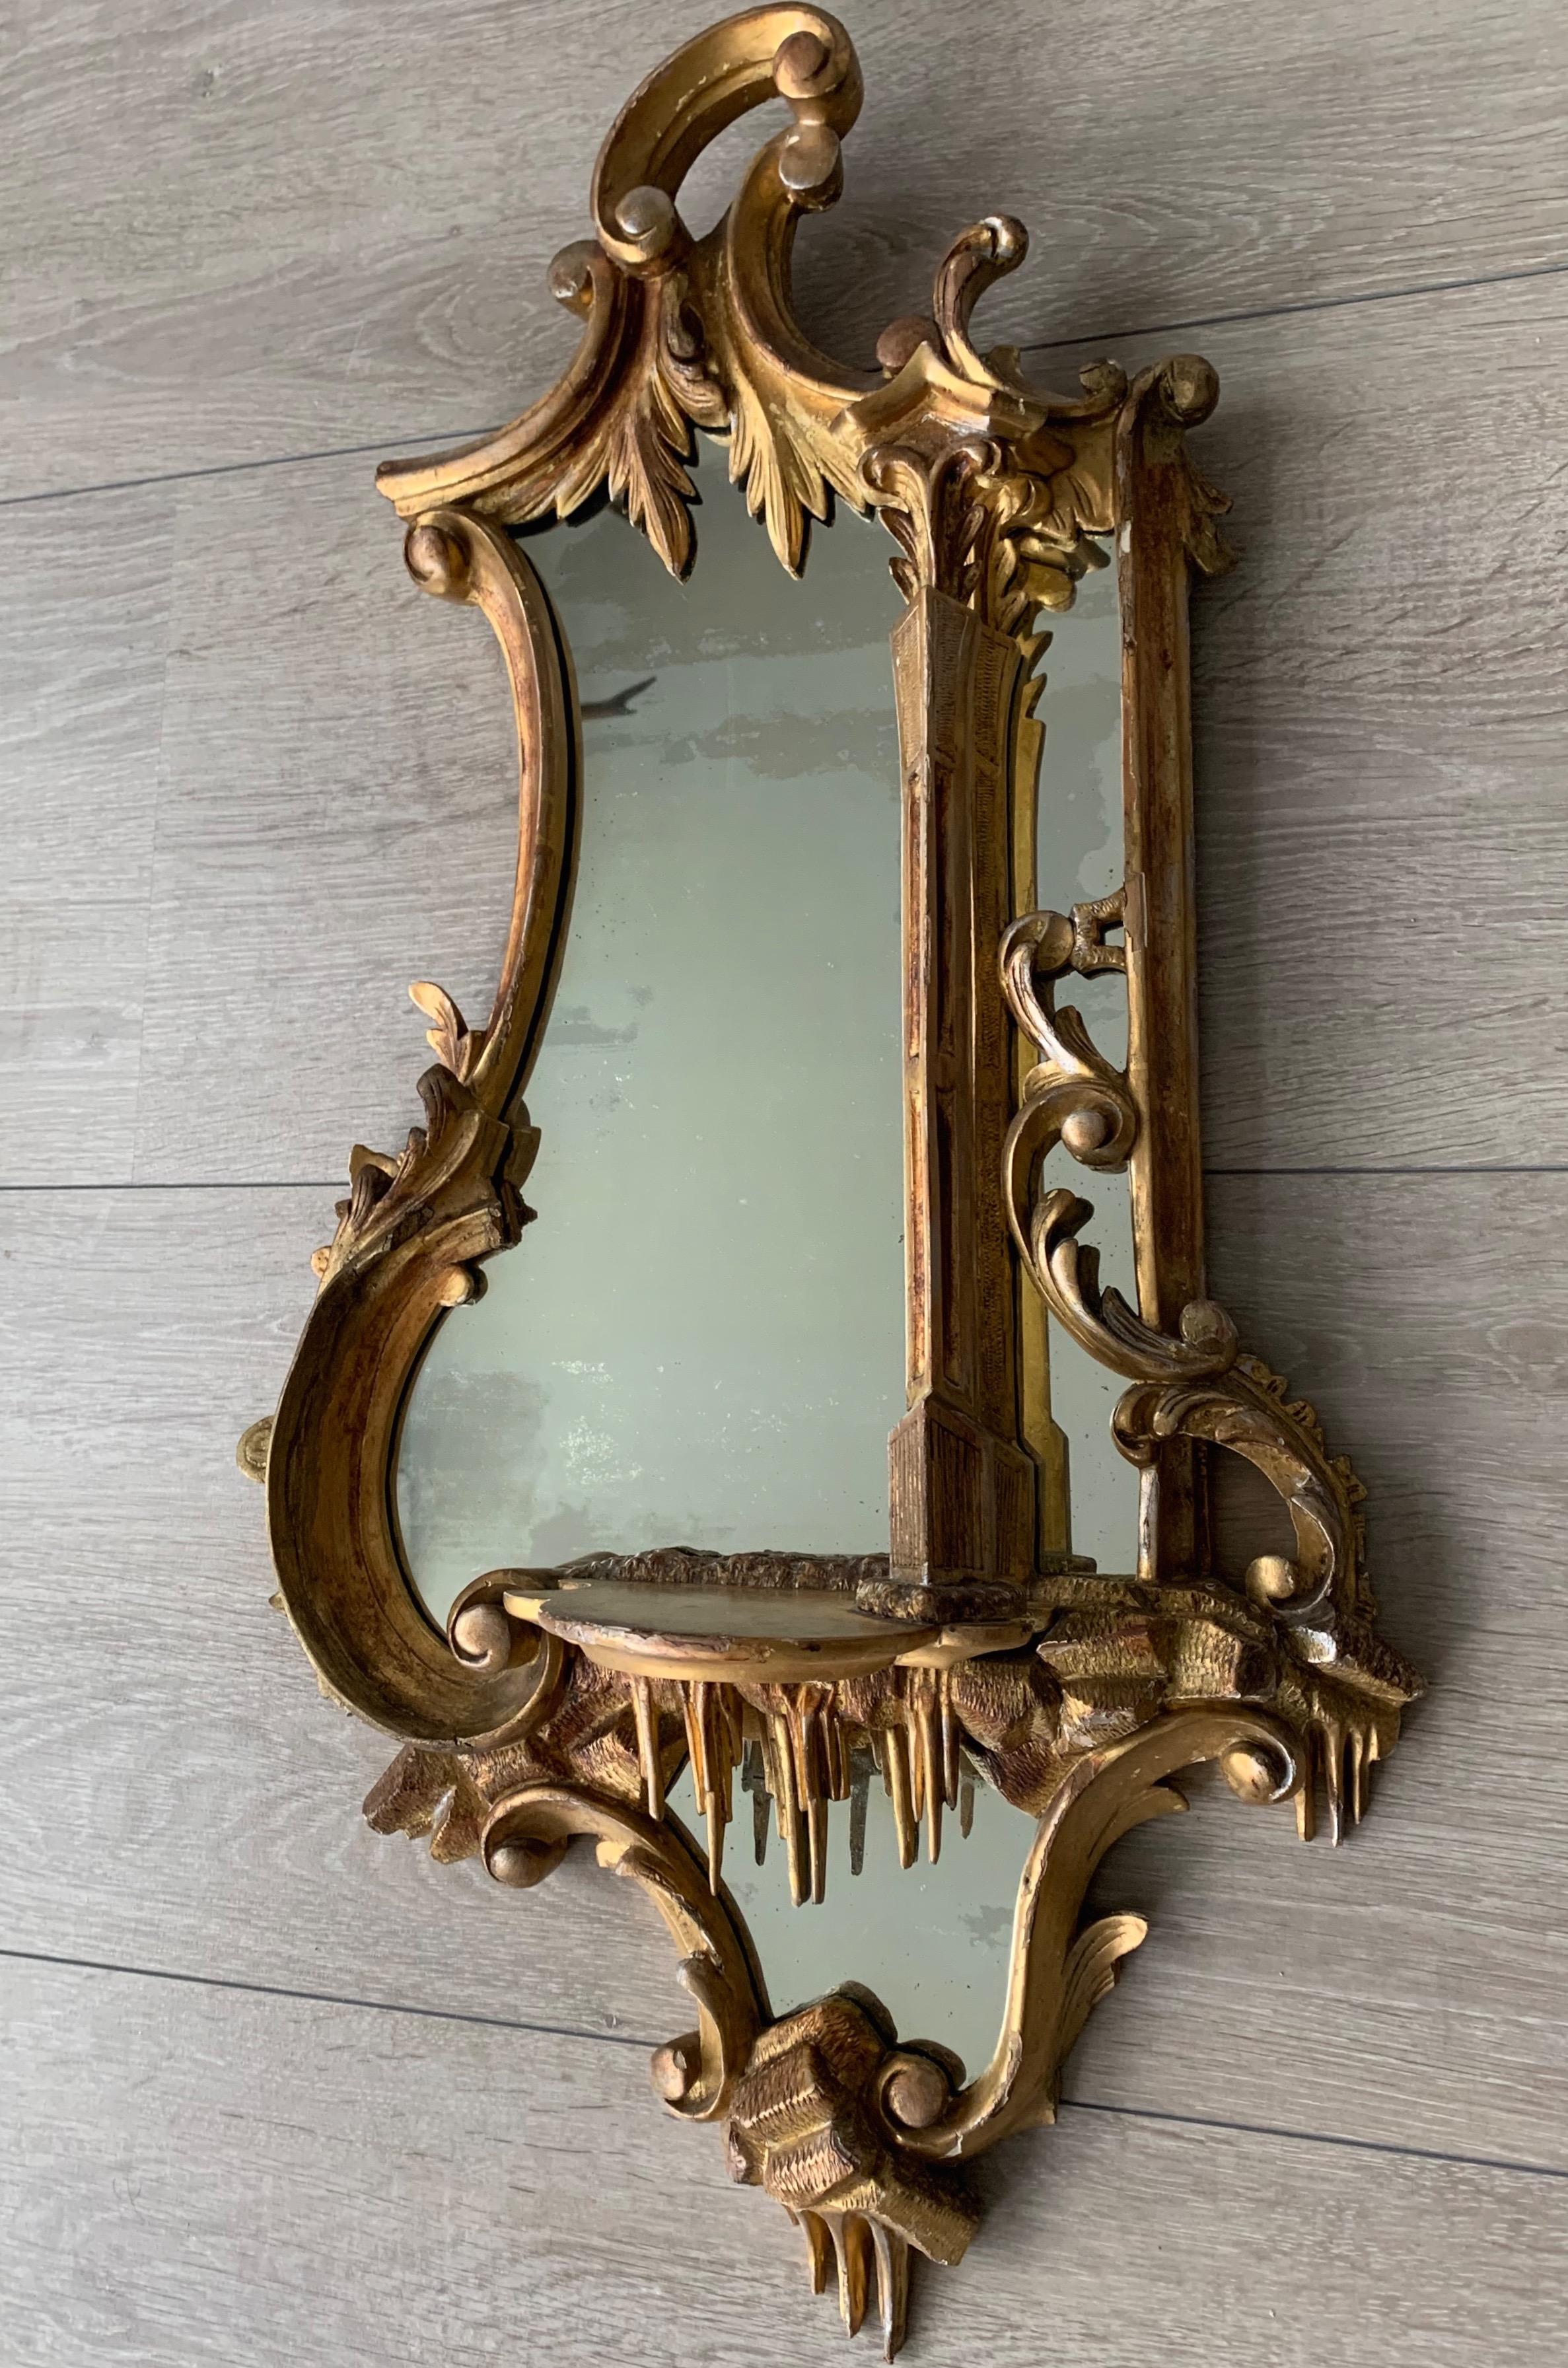  Amazing 19th Century French Antique Gilt Wooden Frame Wall Mirror with Bracket For Sale 15